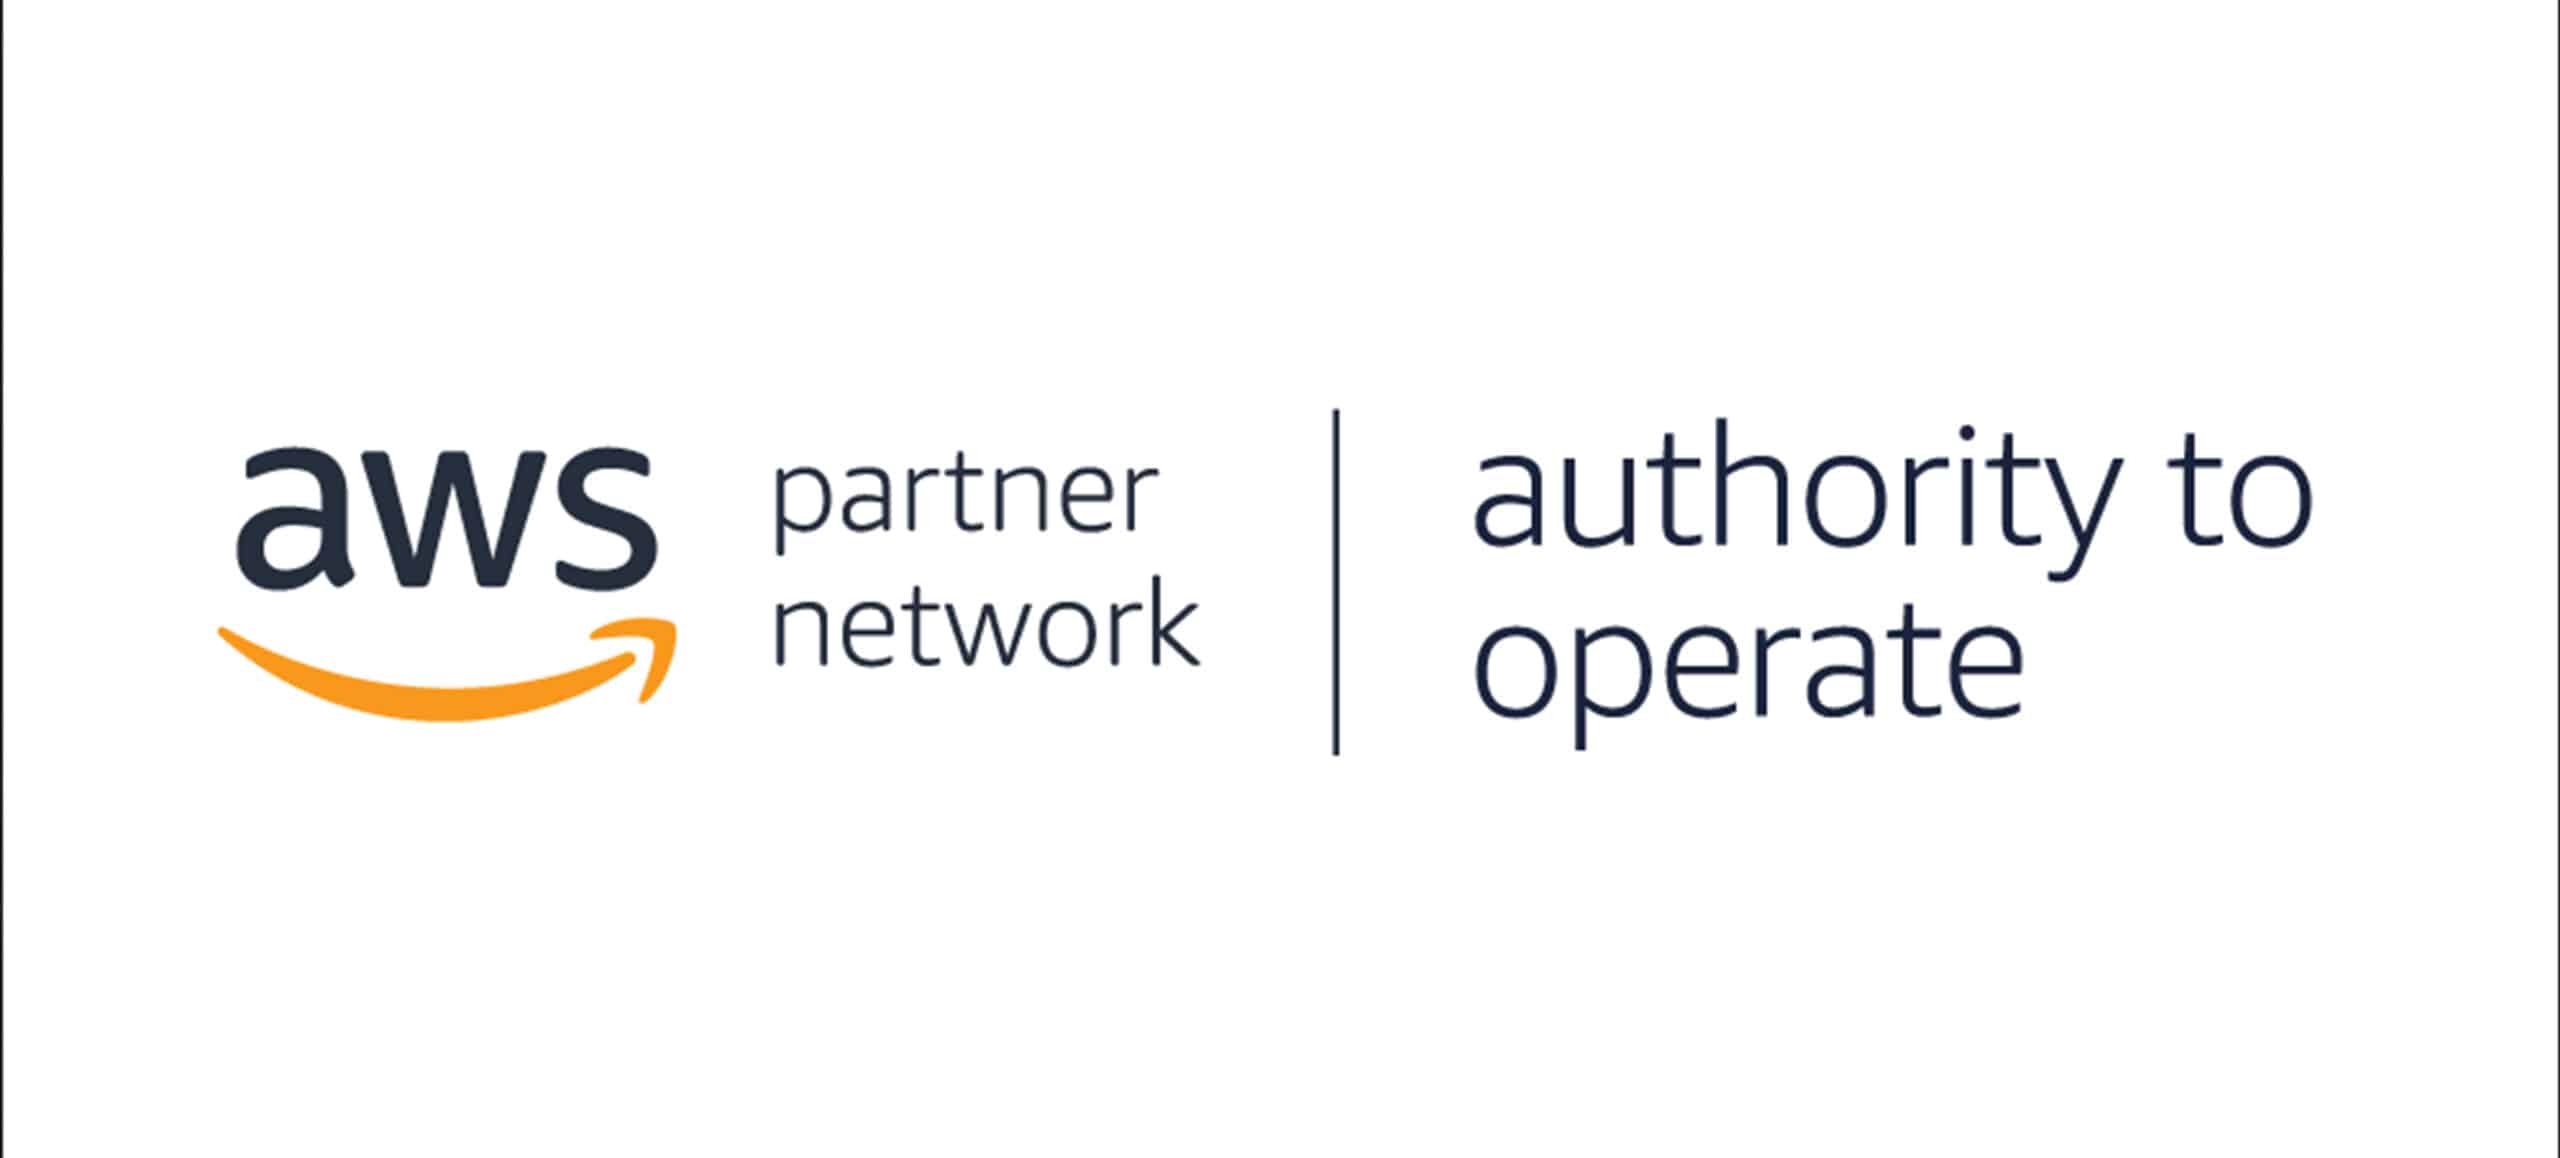 cloudnexa joins authority to operate (ato) on aws program’s global security and compliance acceleration (gcsa) initiative